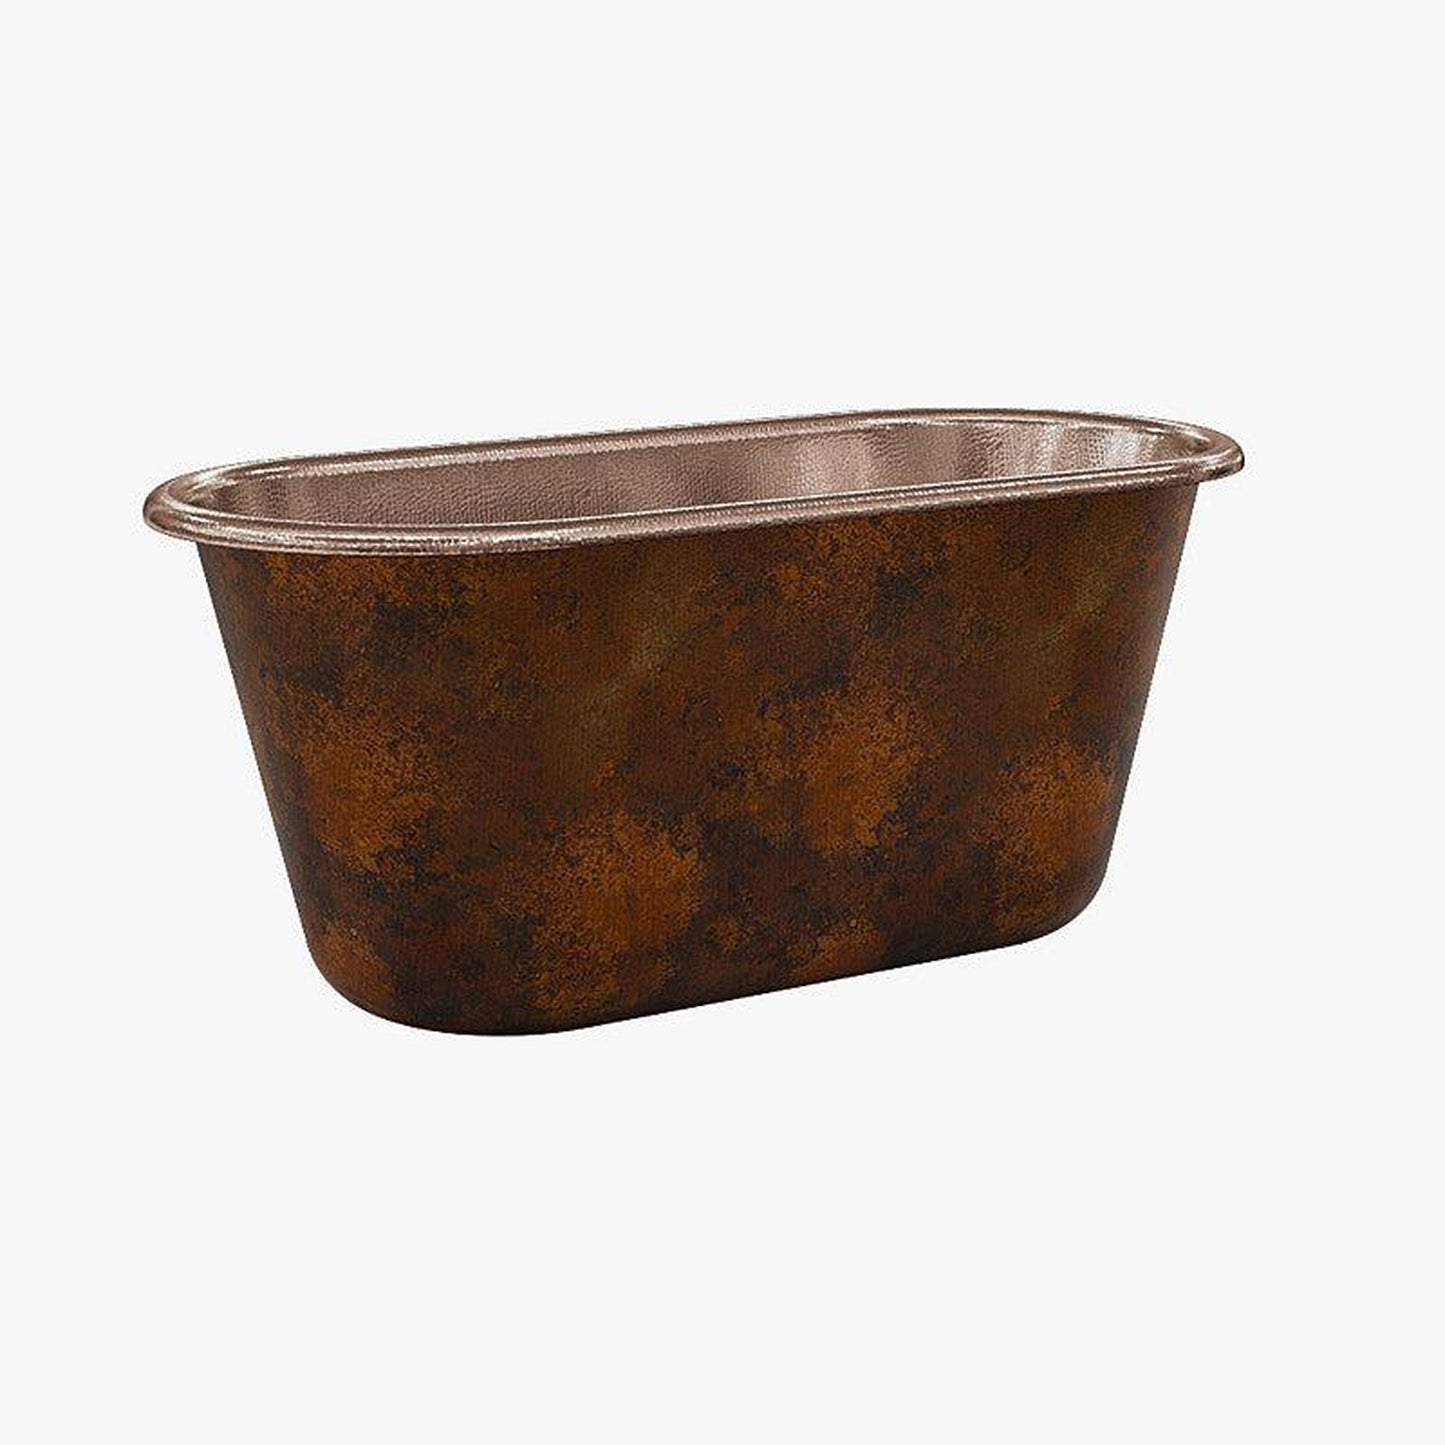 CopperSmith Heritage HX1 60" x 31" x 31" 14-Gauge Fire Copper Freestanding Bathtub With Polished Copper Interior and Oil Rubbed Bronze Overflow Drain and Brushed Nickel Tub Filler